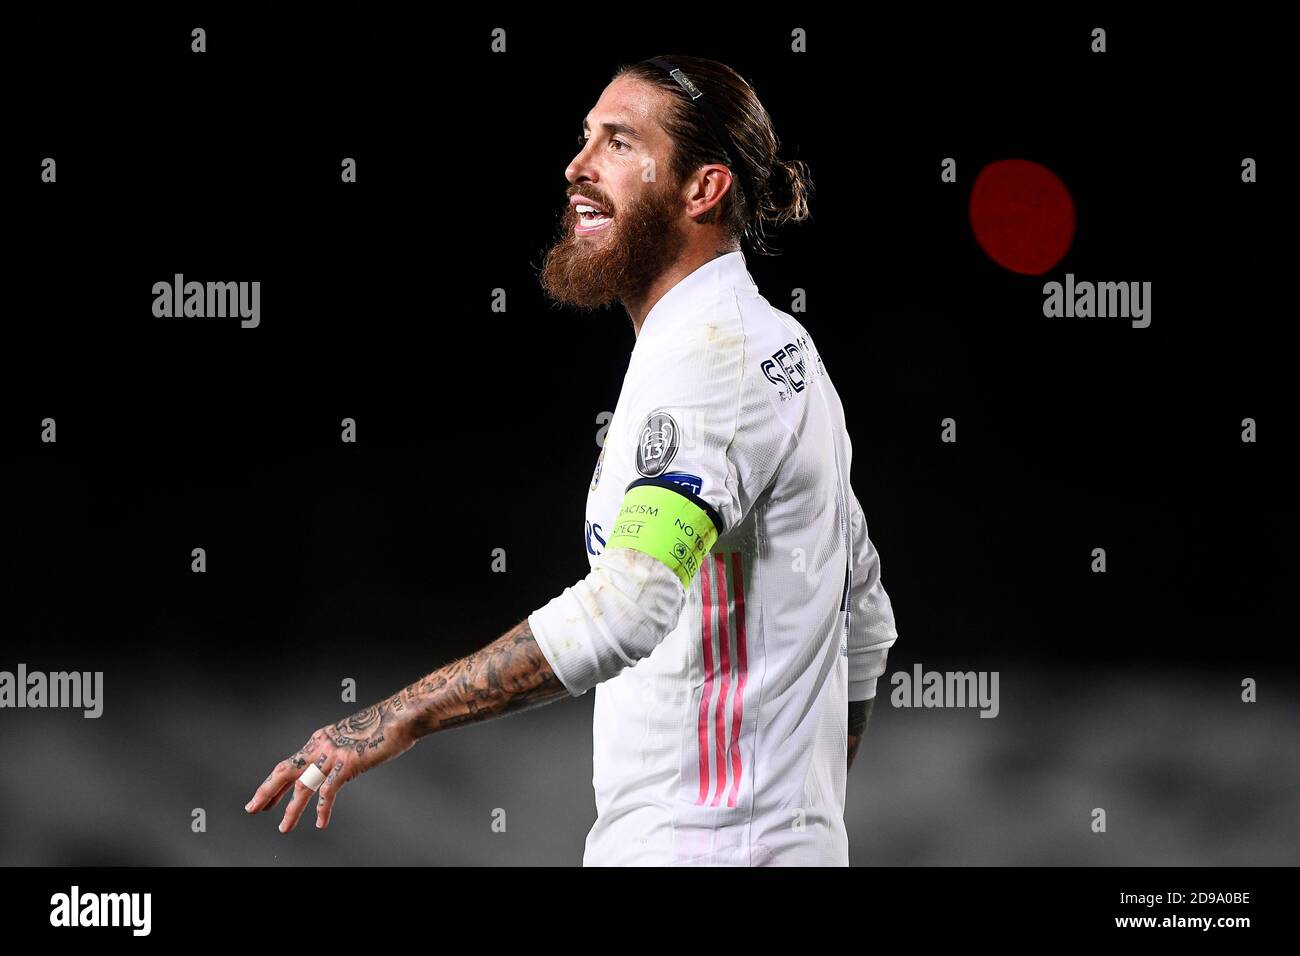 Madrid, Spain. 03rd Nov, 2020. MADRID, SPAIN - November 03, 2020: Sergio Ramos of Real Madrid CF looks on during the Champions League Group B football match between Real Madrid CF and FC Internazionale. Real Madrid CF won 3-2 over FC Internazionale. (Photo by Nicolò Campo/Sipa USA) Credit: Sipa USA/Alamy Live News Stock Photo